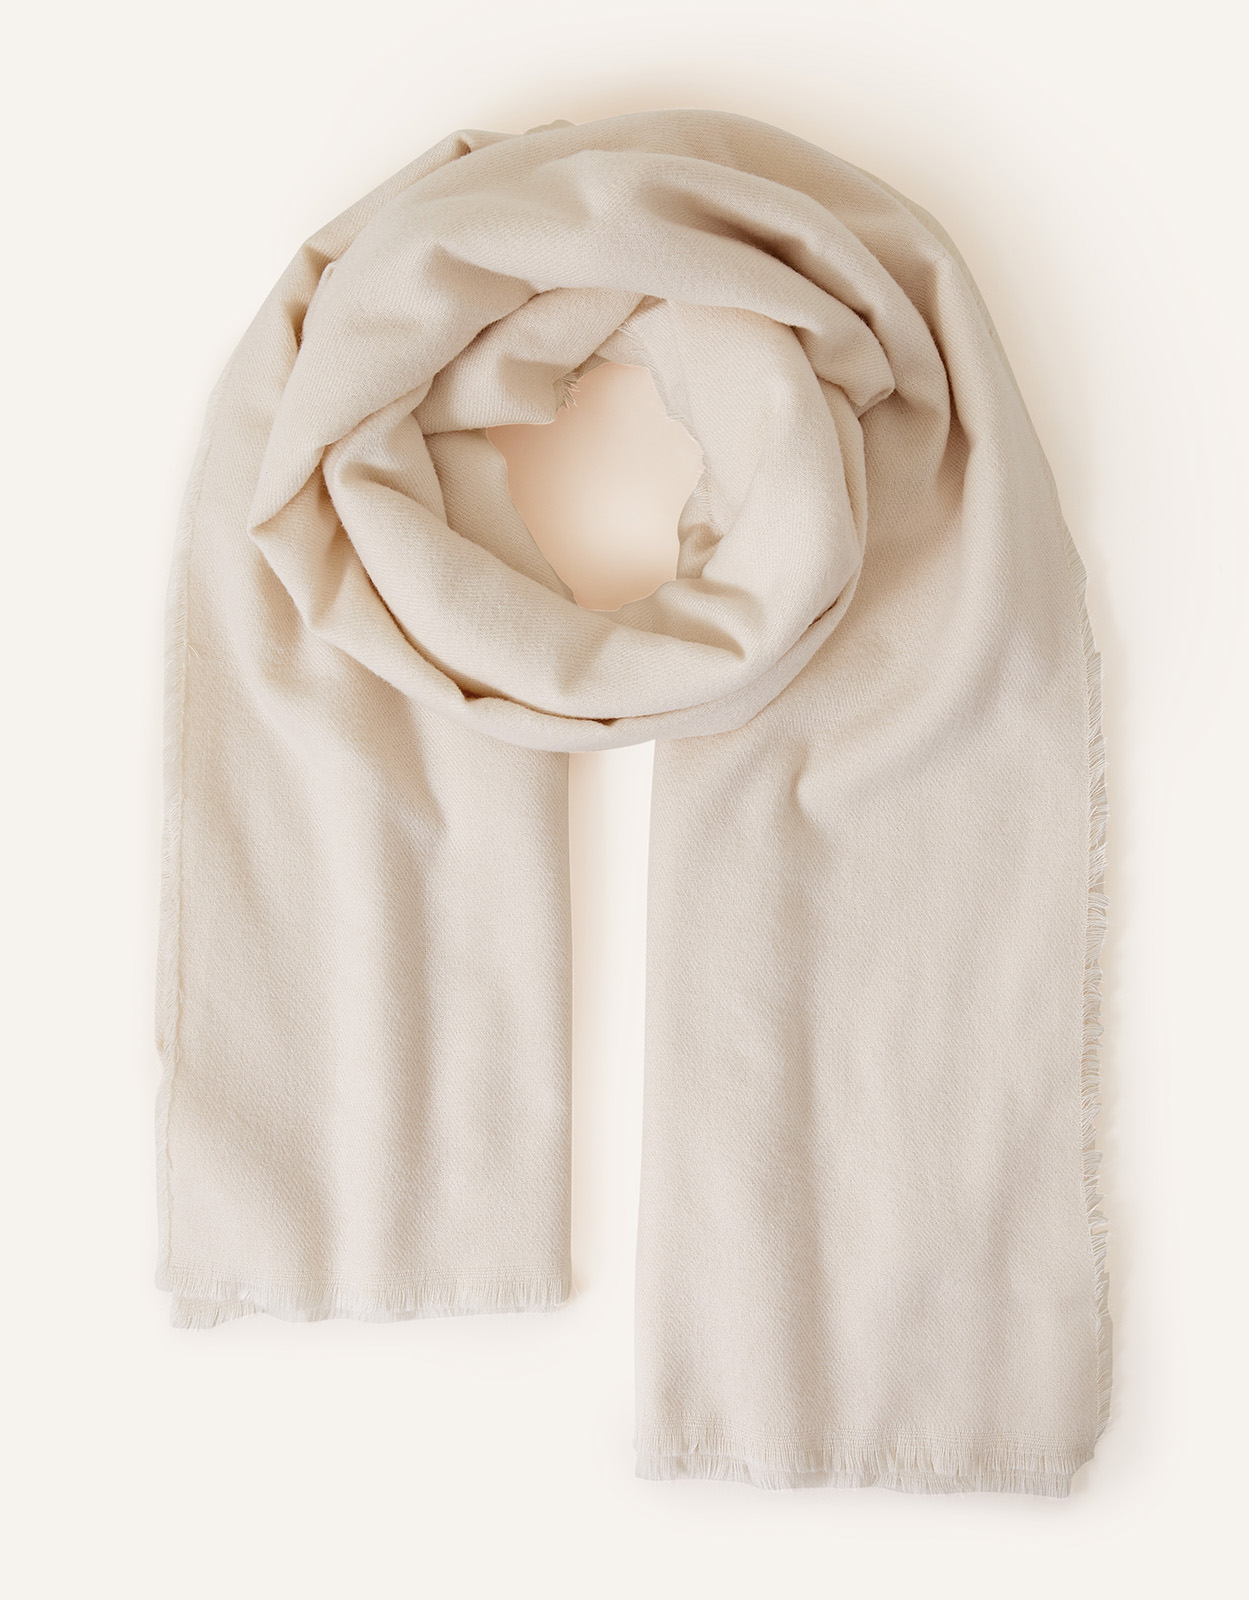 Accessorize Women's Grace Super-Soft Blanket Scarf Natural, Size: Small